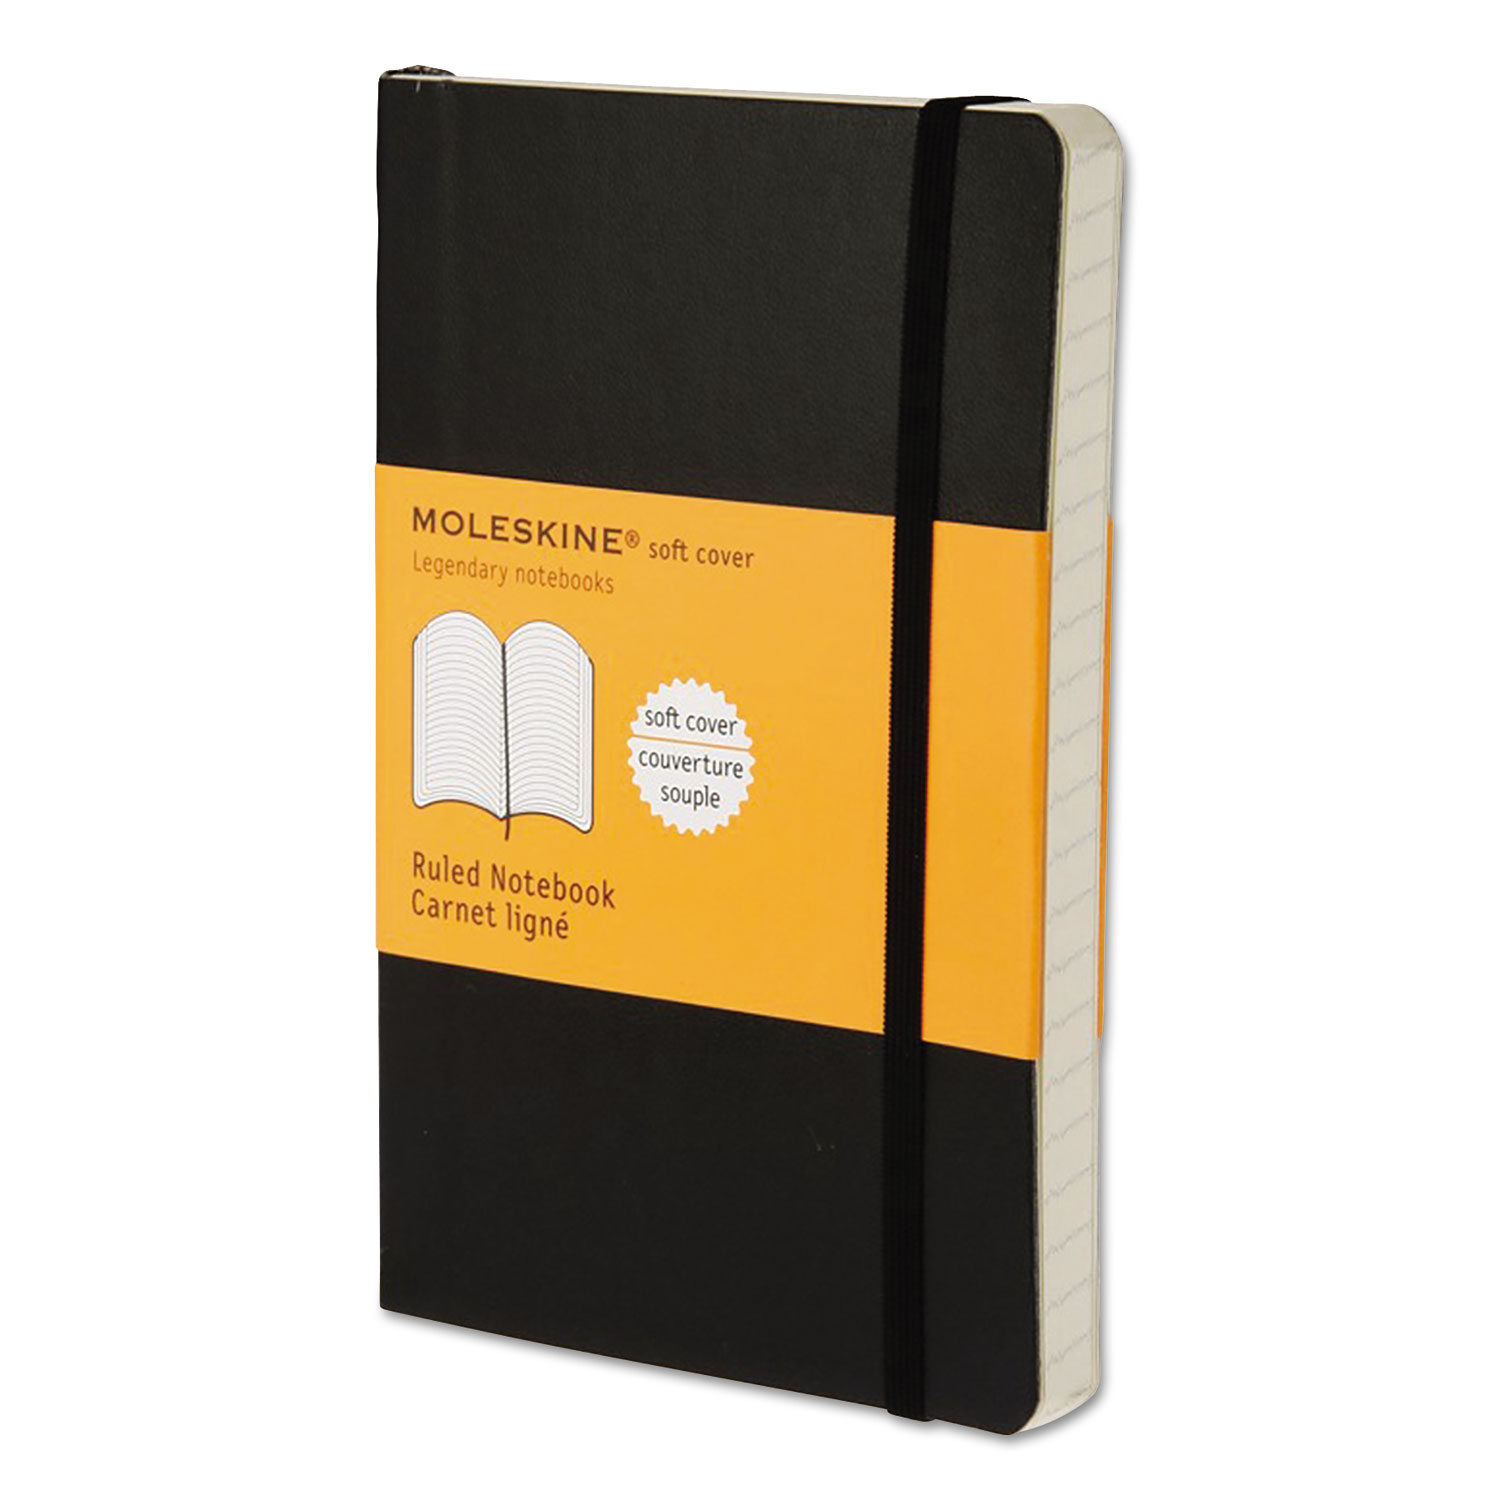  Moleskine 9788883707100 Classic Softcover Notebook, Narrow Rule, Black Cover, 5.5 x 3.5, 192 Sheets (HBGMS710) 